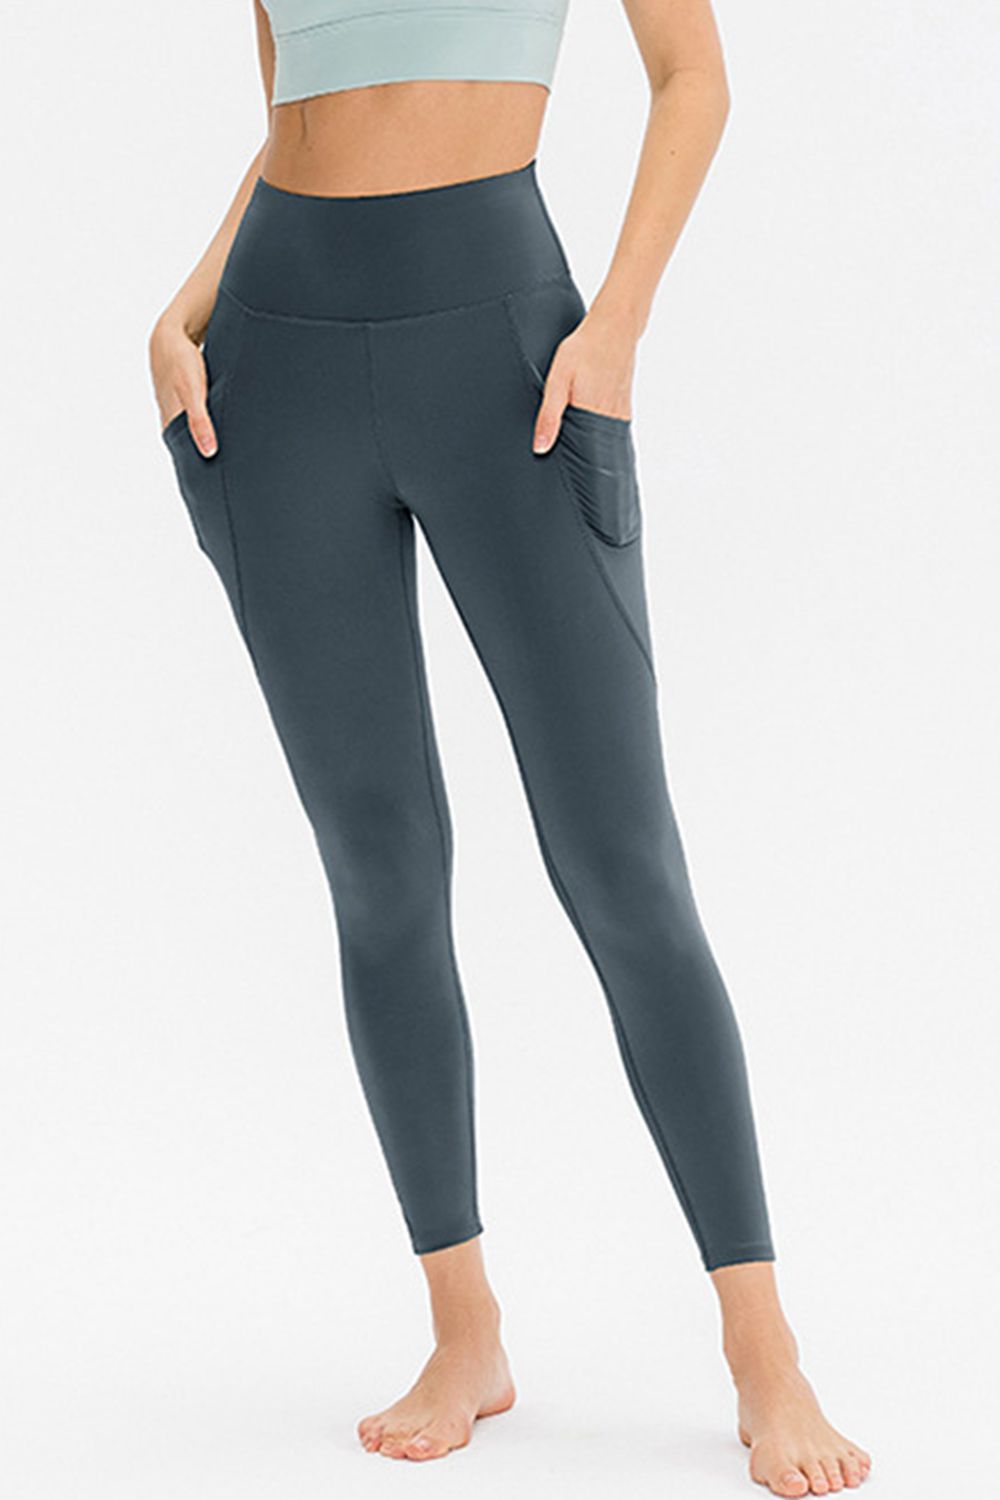 Slim Fit Long Active Leggings with Pockets - Charcoal / S Wynter 4 All Seasons